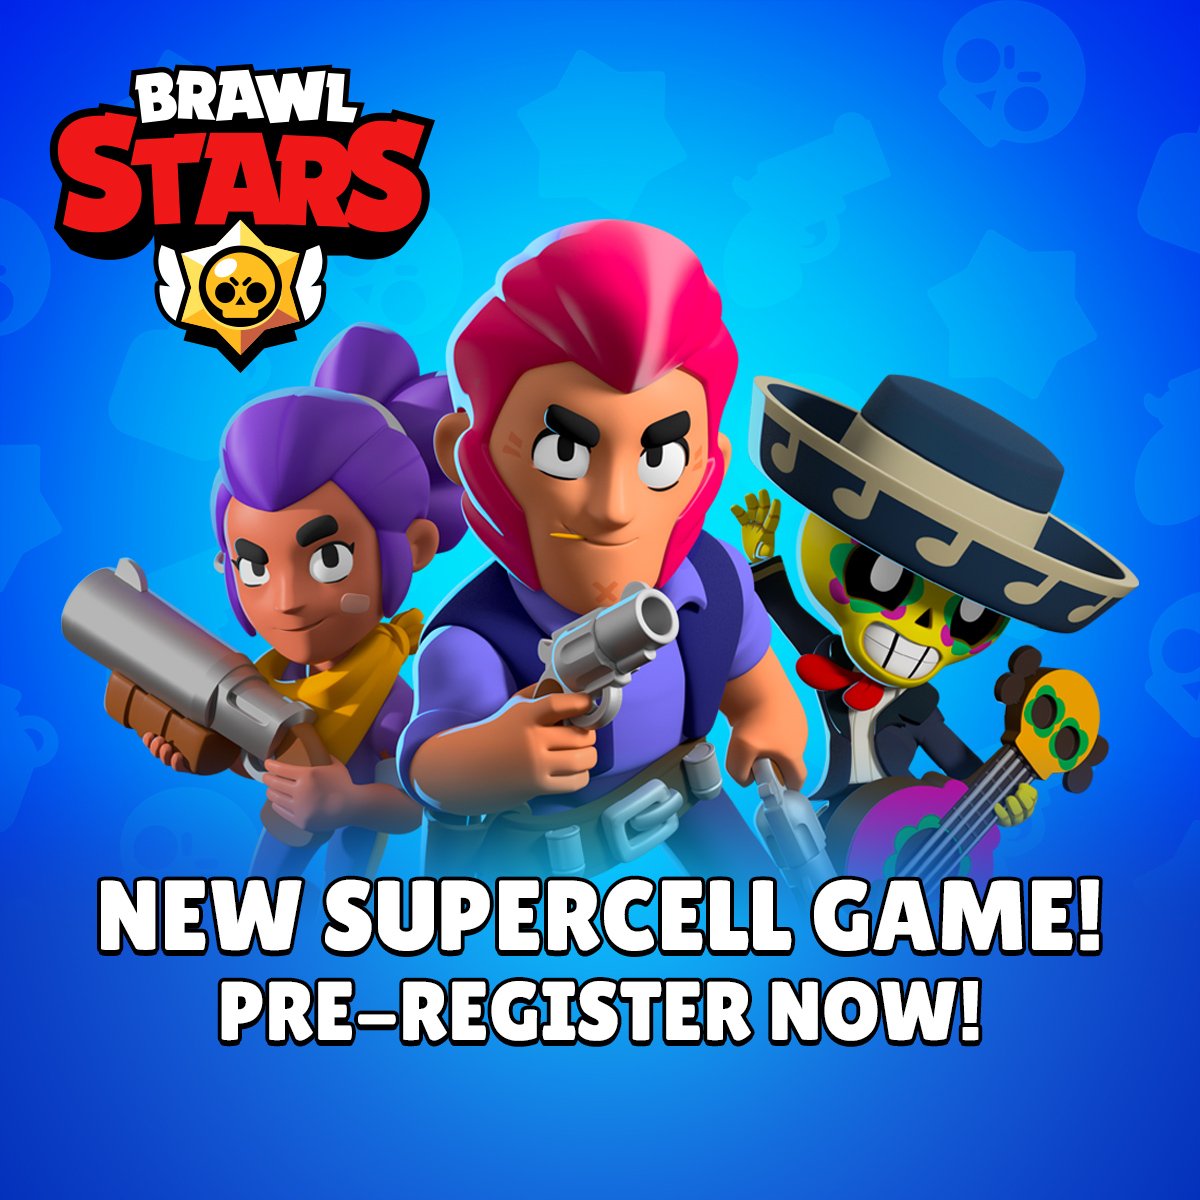 Supercell On Twitter It S Official Brawlstars Is Our 5th Game To Go Global Pre Register Now Https T Co Lyntlbauly - number of pre registers for brawl stars